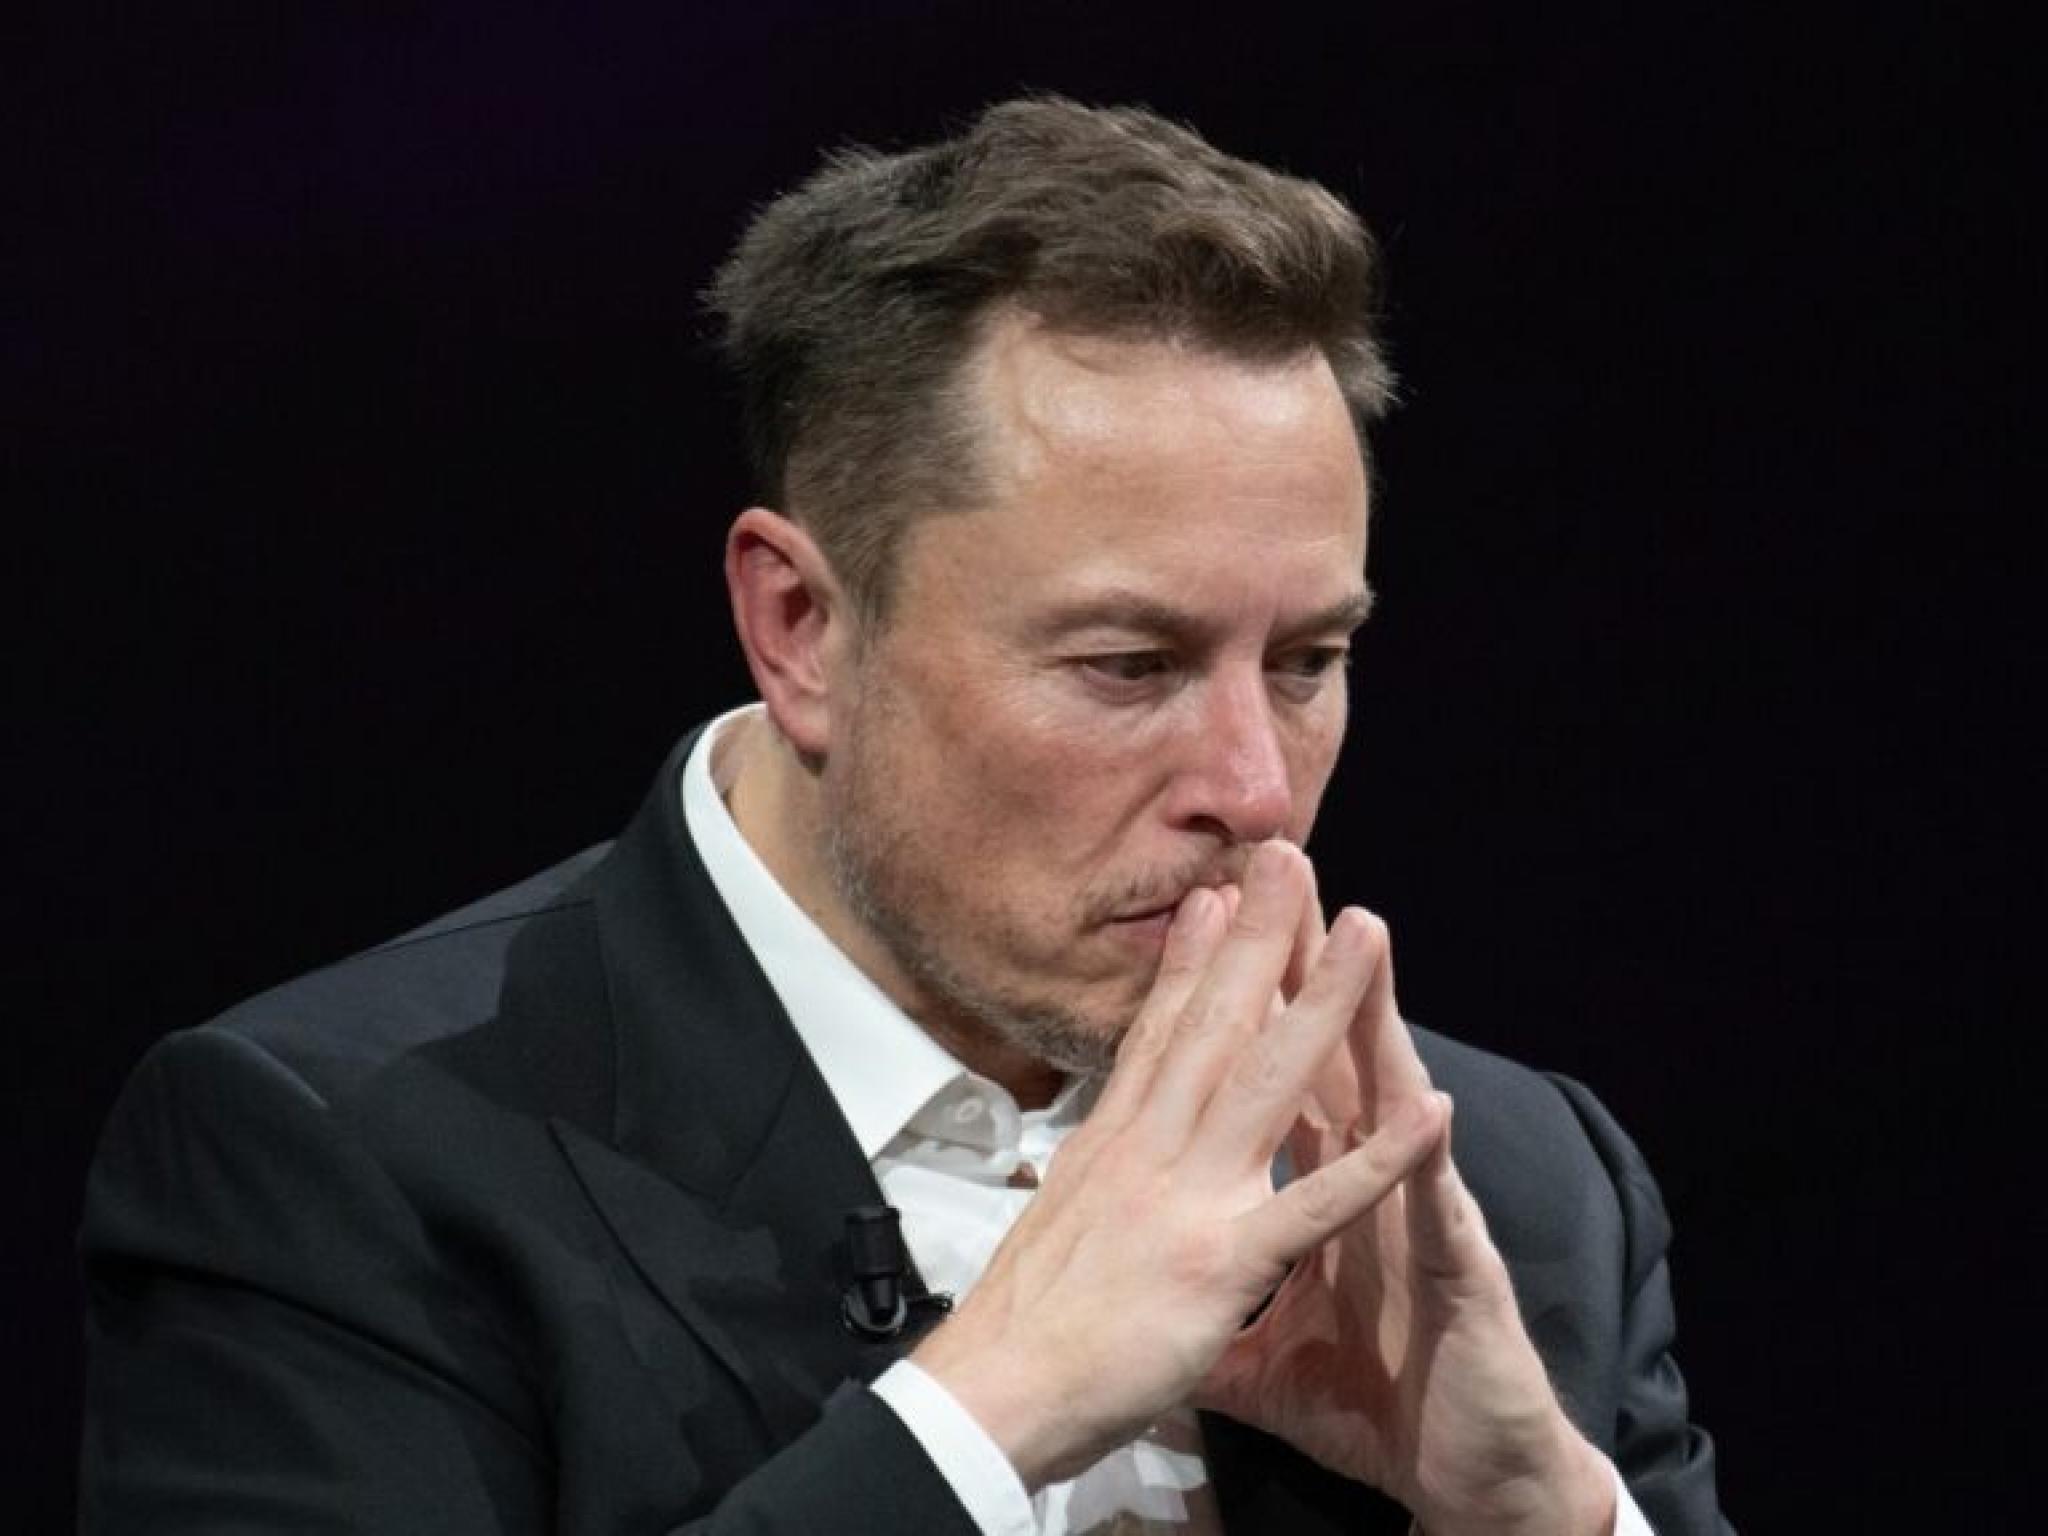  elon-musk-has-fond-memories-from-red-lobster-expresses-sorrow-at-seafood-chains-bankruptcy-news 